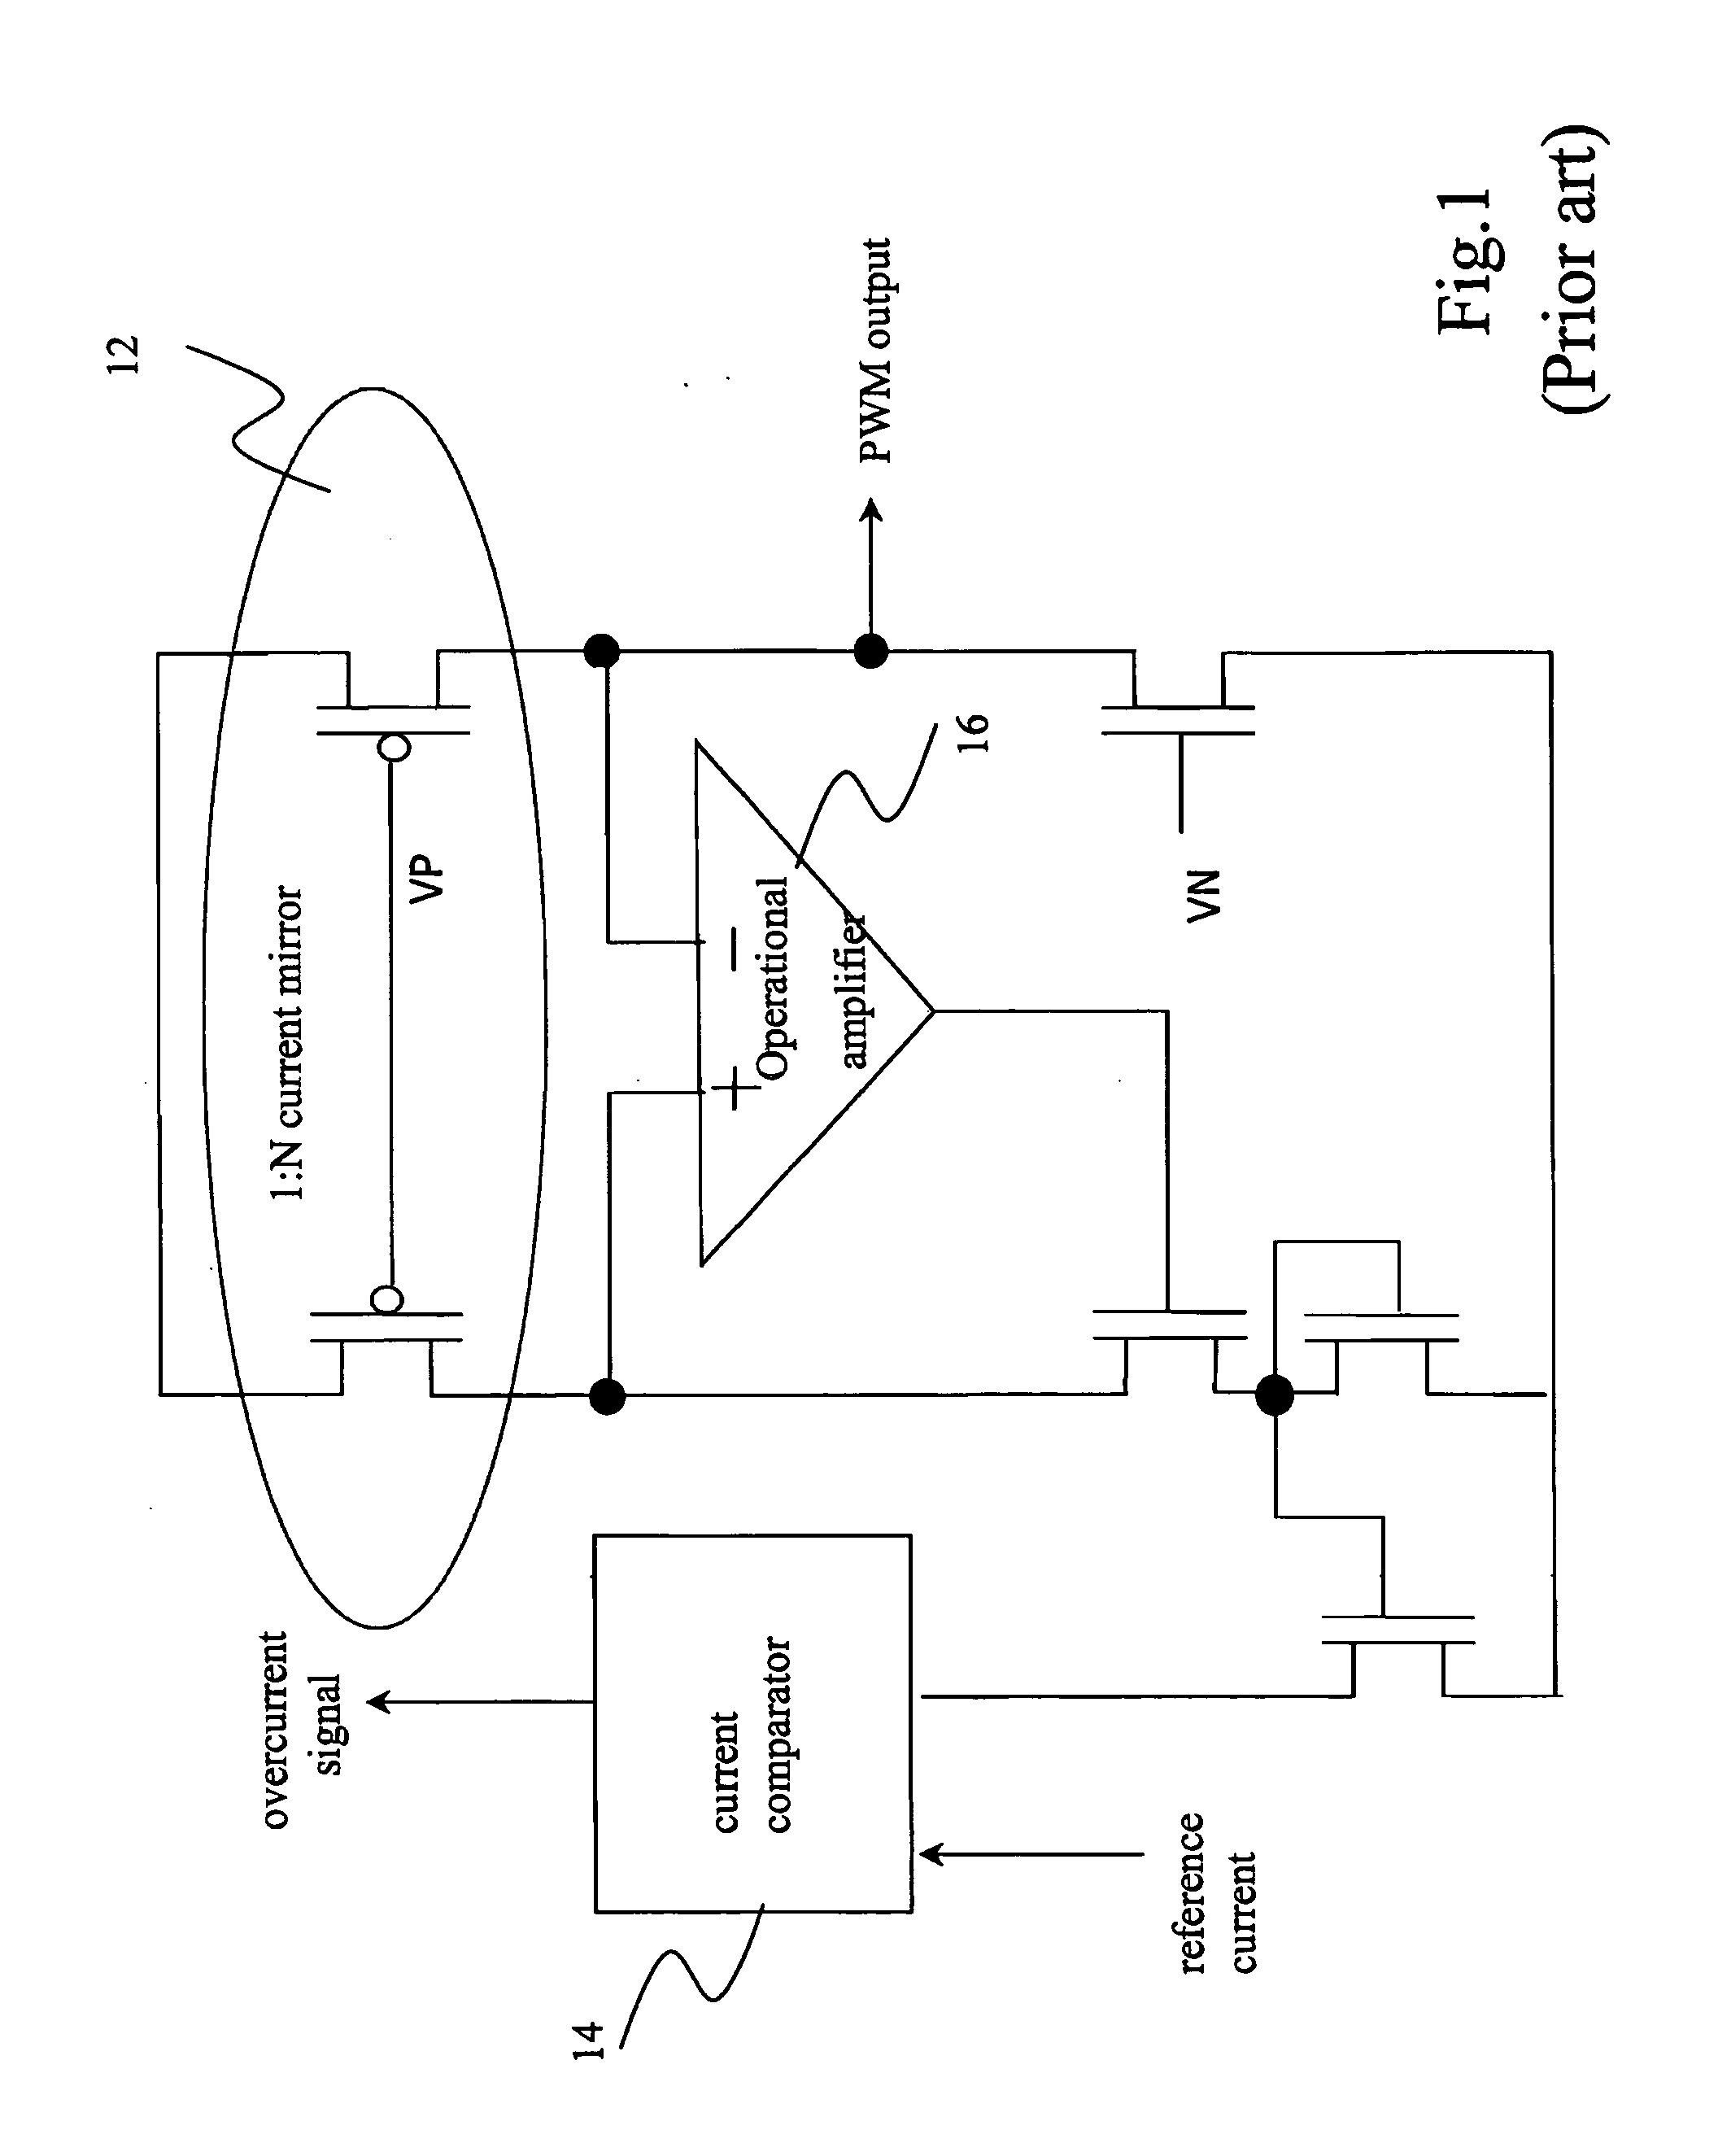 Voltage detection type overcurrent protection device for class-d amplifier